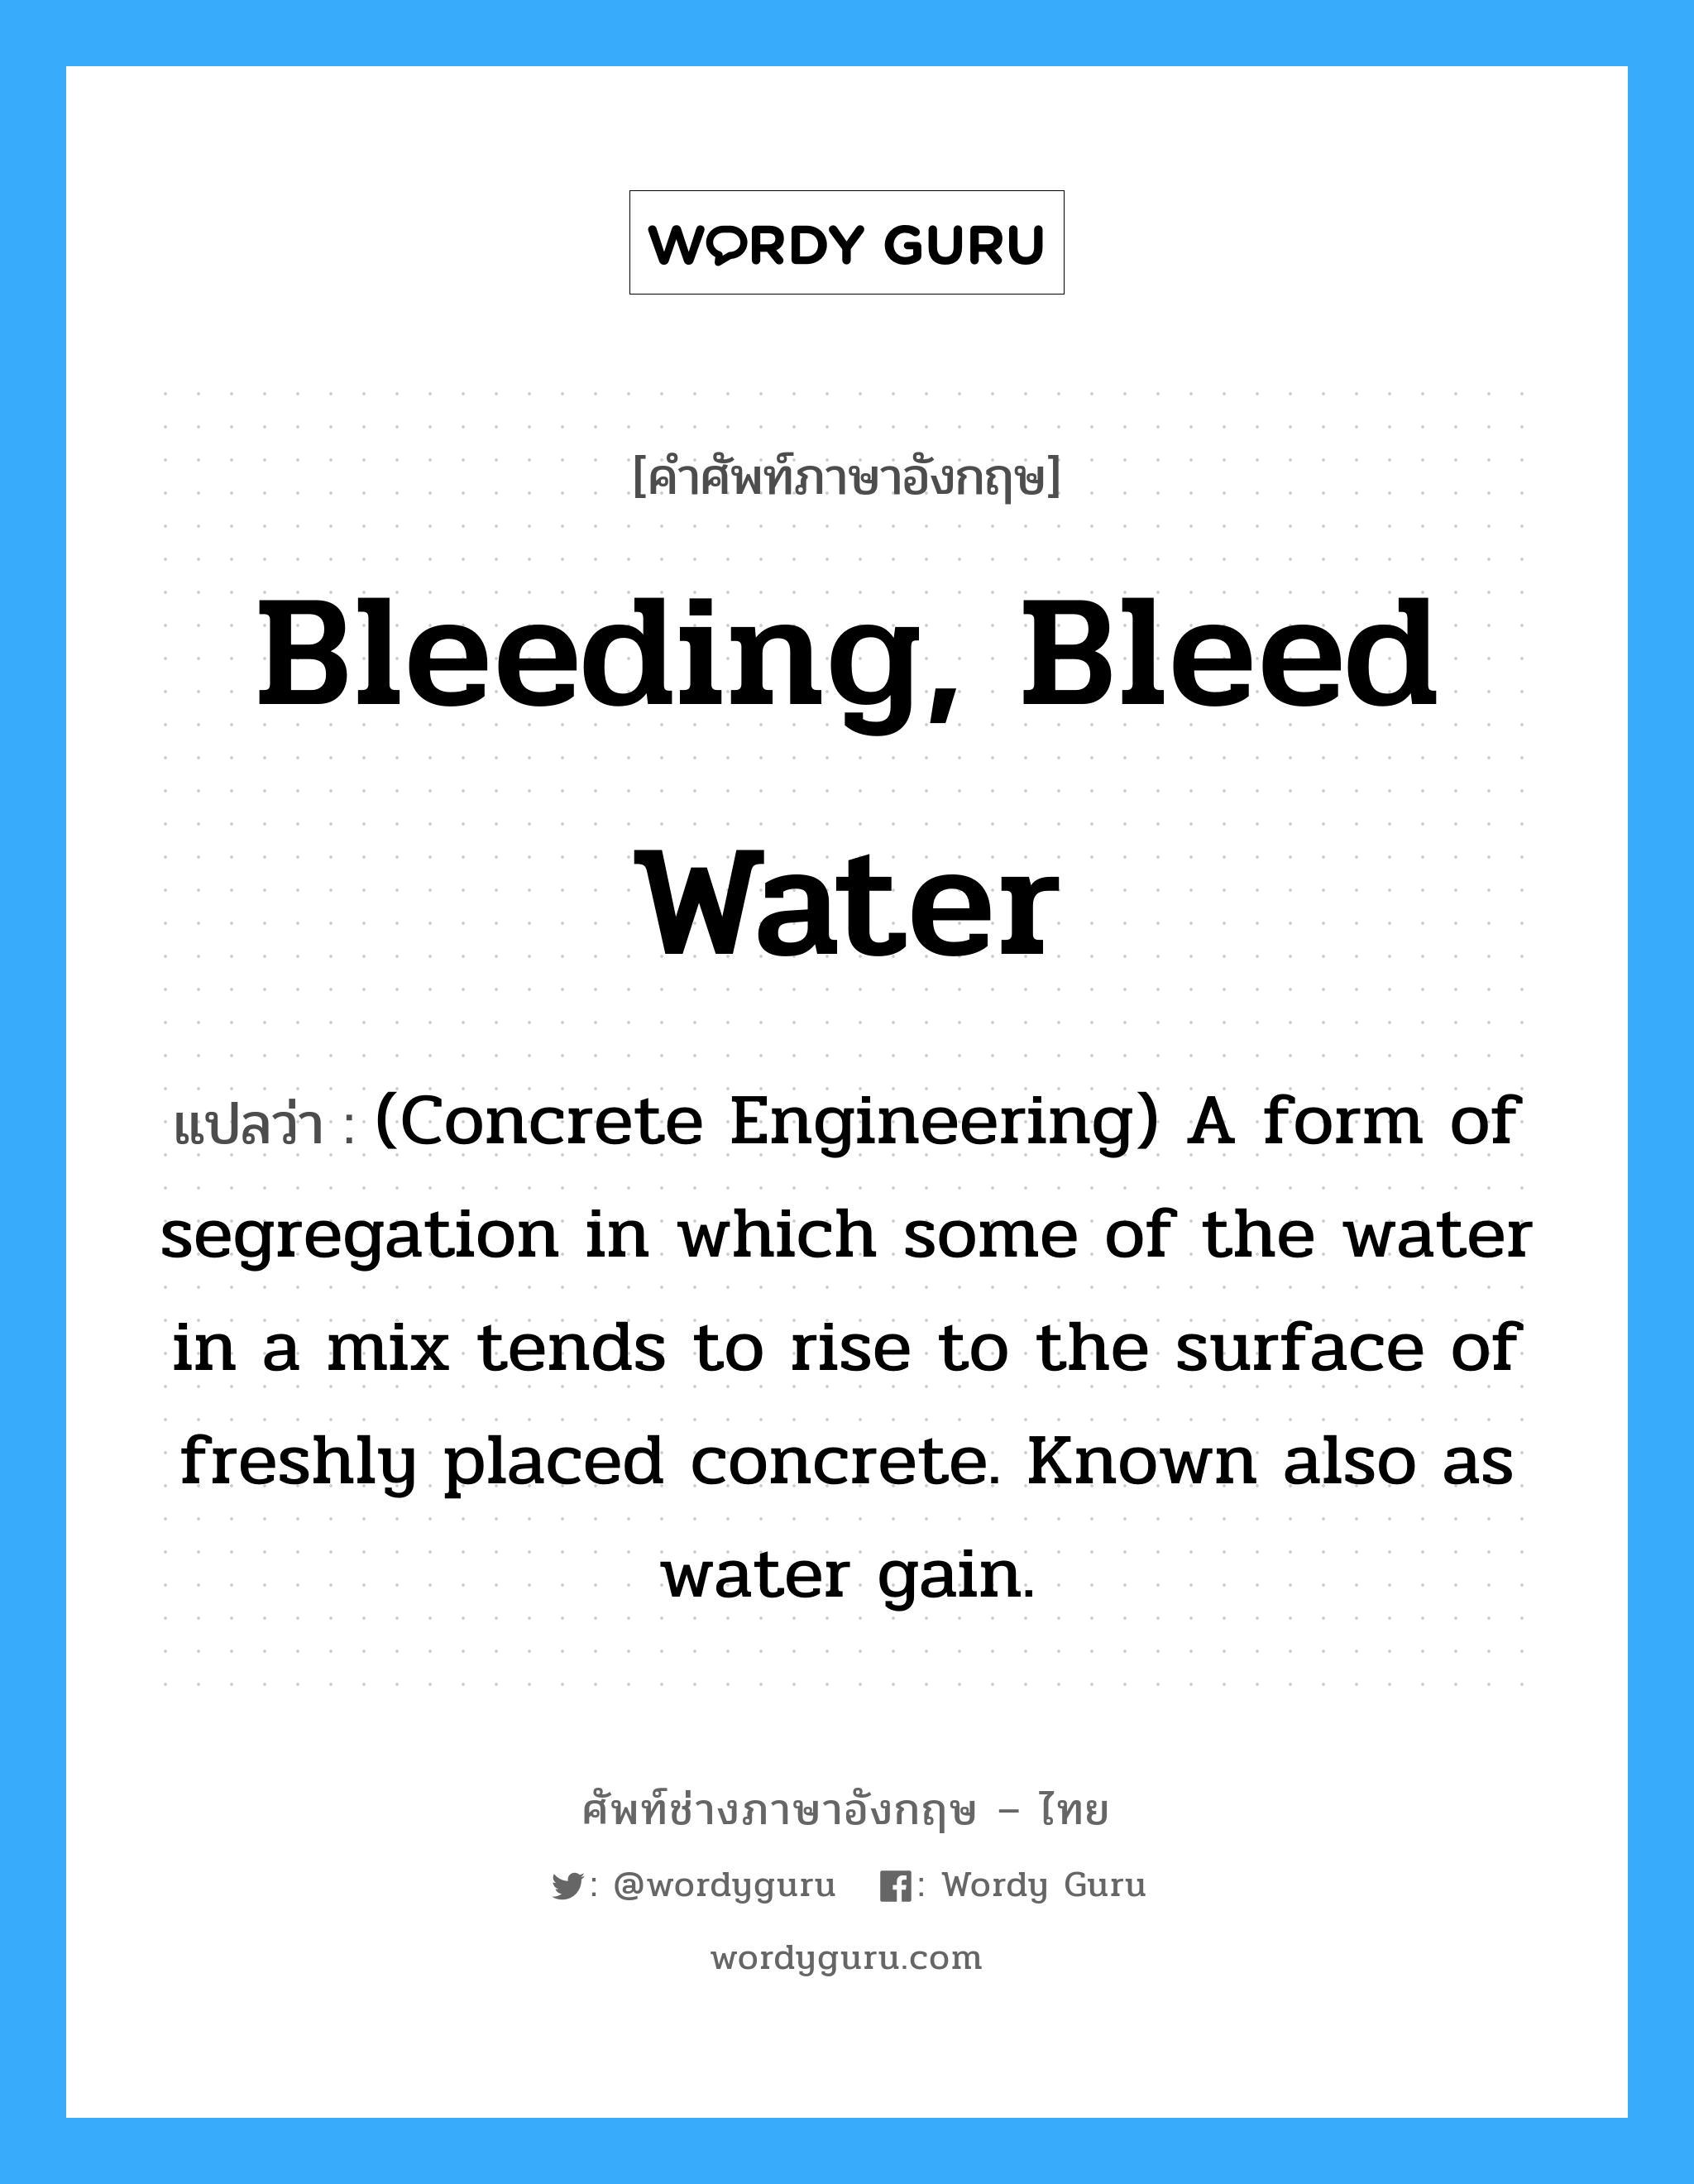 (Concrete Engineering) A form of segregation in which some of the water in a mix tends to rise to the surface of freshly placed concrete. Known also as water gain. ภาษาอังกฤษ?, คำศัพท์ช่างภาษาอังกฤษ - ไทย (Concrete Engineering) A form of segregation in which some of the water in a mix tends to rise to the surface of freshly placed concrete. Known also as water gain. คำศัพท์ภาษาอังกฤษ (Concrete Engineering) A form of segregation in which some of the water in a mix tends to rise to the surface of freshly placed concrete. Known also as water gain. แปลว่า Bleeding, Bleed Water